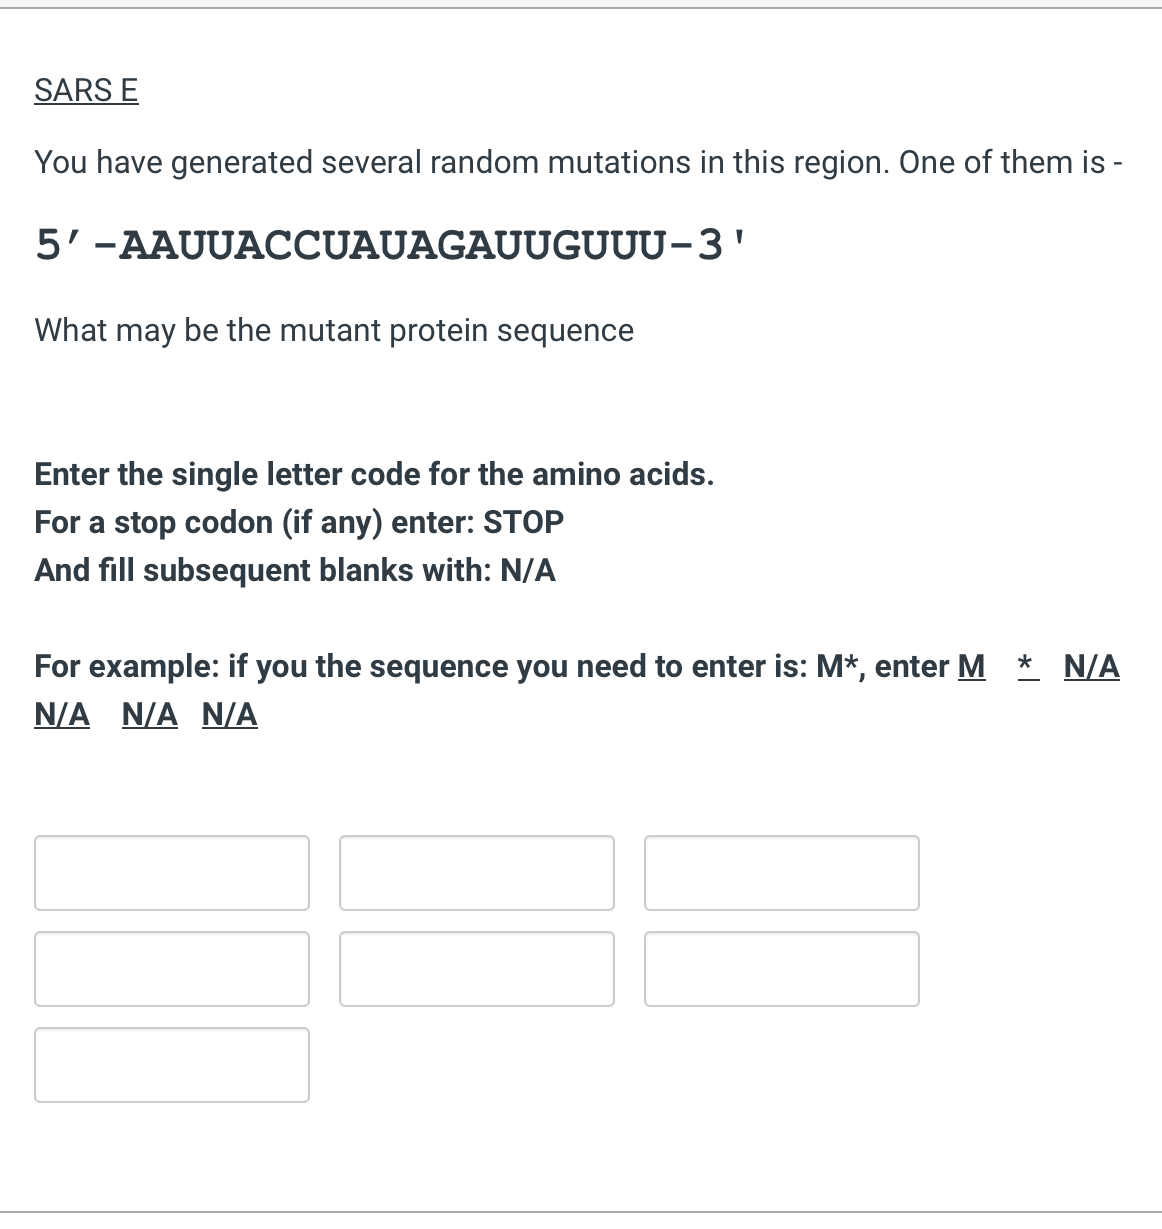 SARS E
You have generated several random mutations in this region. One of them is -
5'-AAUUACCUAUAGAUUGUUU-3'
What may be the mutant protein sequence
Enter the single letter code for the amino acids.
For a stop codon (if any) enter: STOP
And fill subsequent blanks with: N/A
For example: if you the sequence you need to enter is: M*, enter M
N/A N/A N/A
N/A